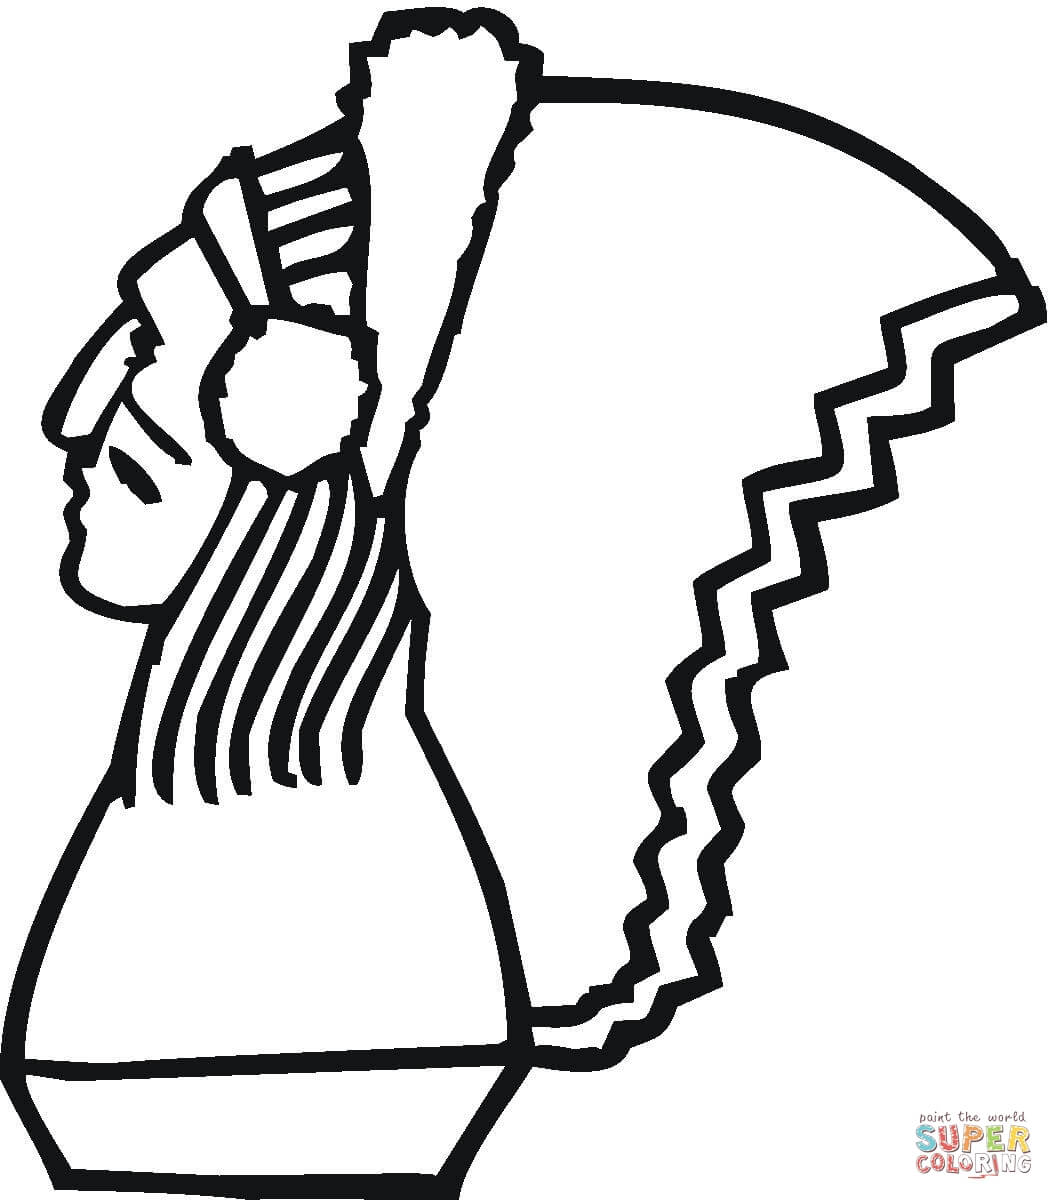 War bonnet coloring page free printable coloring pages